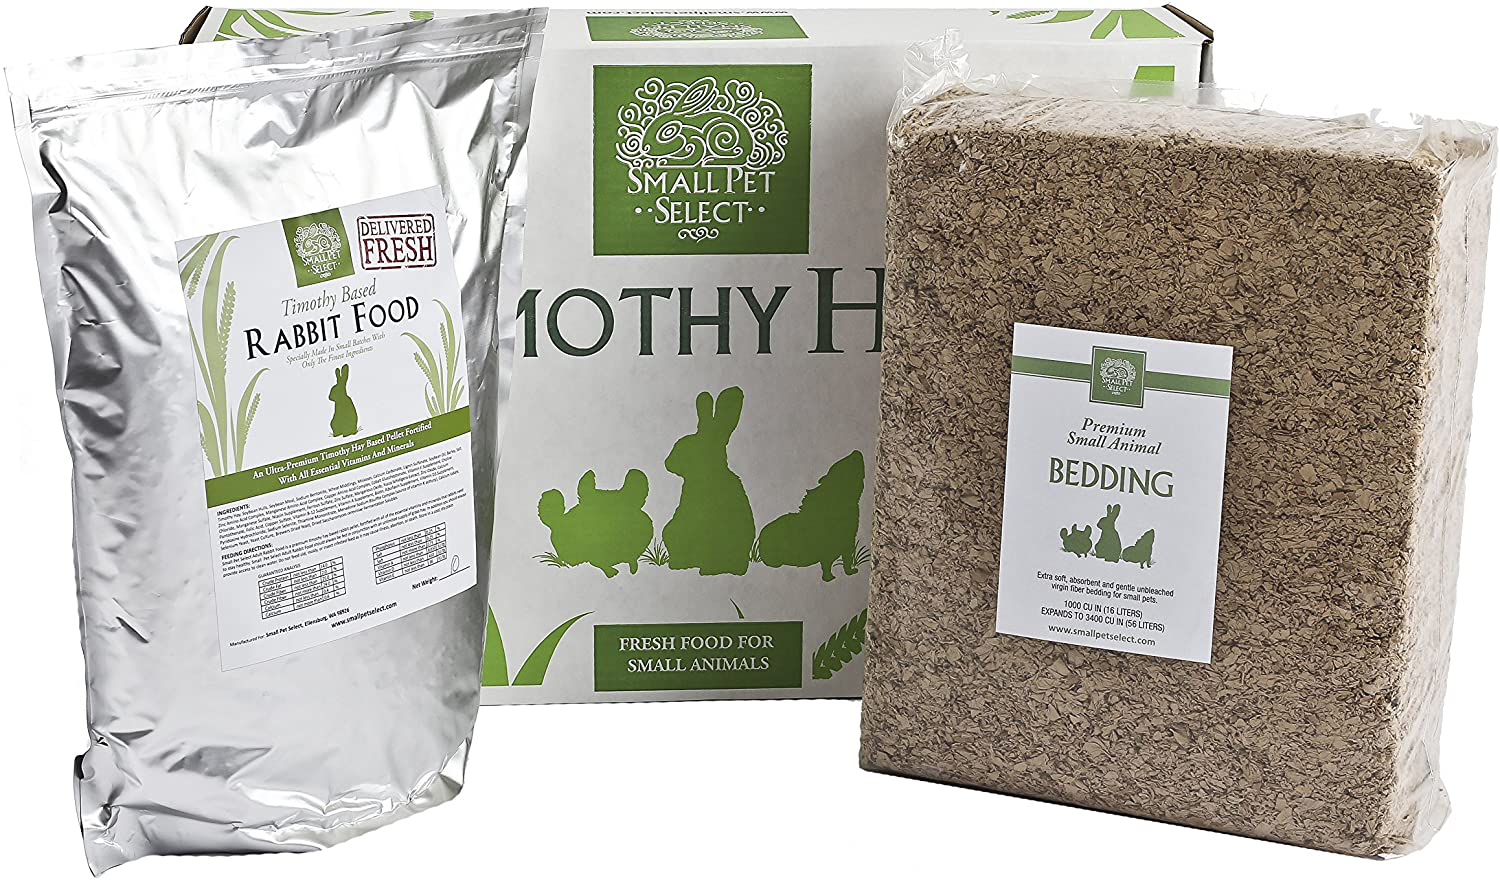 Small Pet Select Deluxe Combo Pack: Timothy Hay (5 Lb.), Rabbit Food (5 Lb.), Bedding (56L)